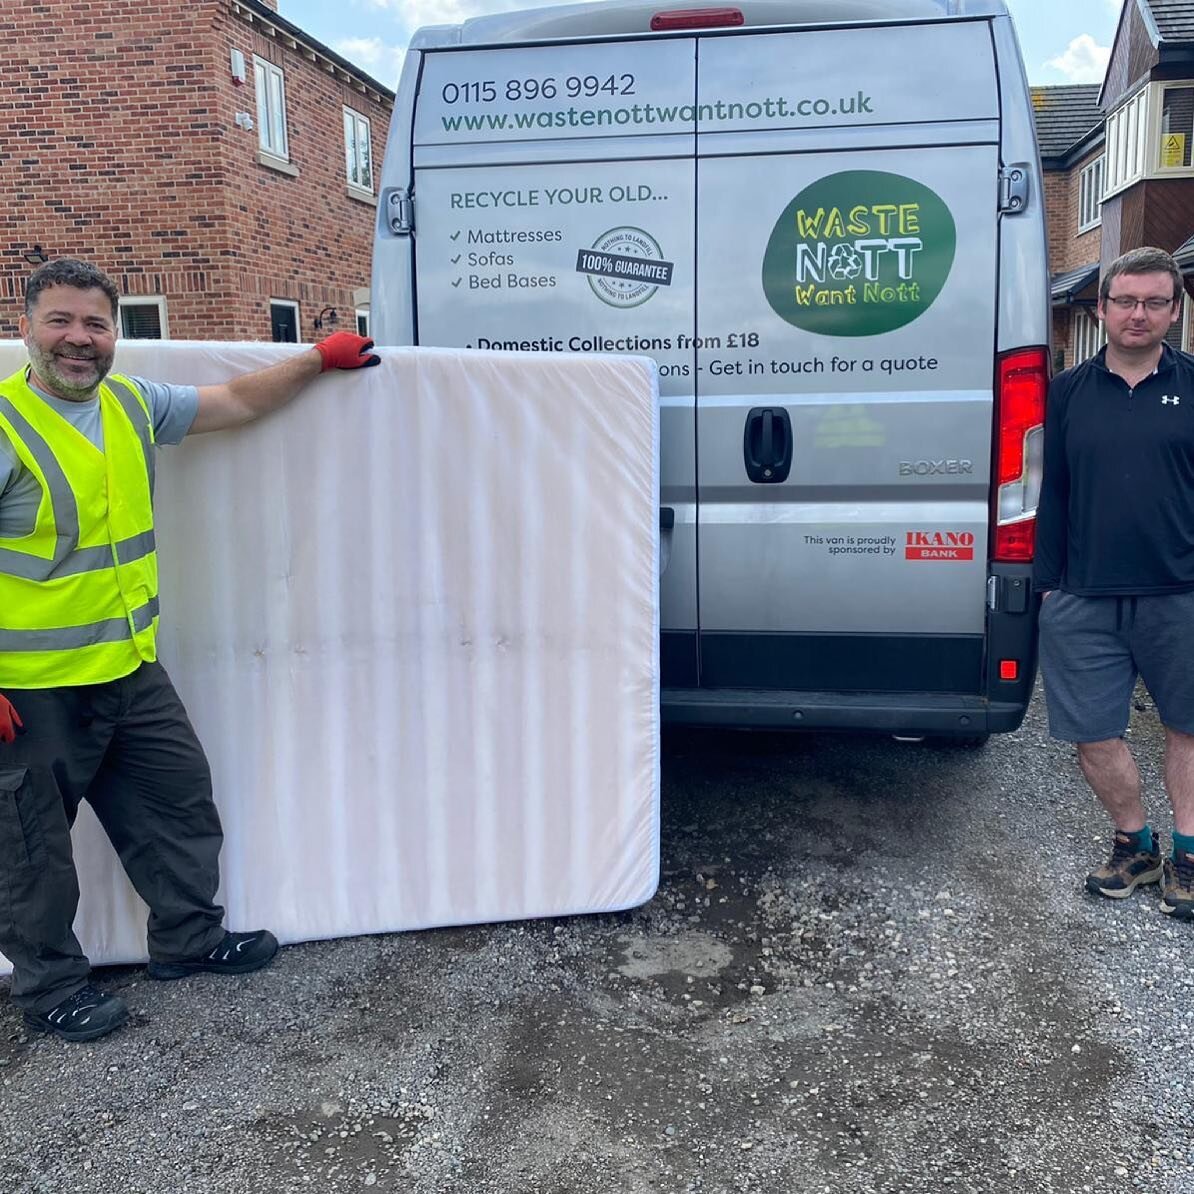 Having the sign-written VAN seems to be paying off 🥳👏🏼🥰♻️ Today we collected from Alex &amp; here&rsquo;s what he had to say... 

&ldquo;Parked behind the #WasteNottWantNott van, took a photo and ordered the removal of my old mattress when I got 